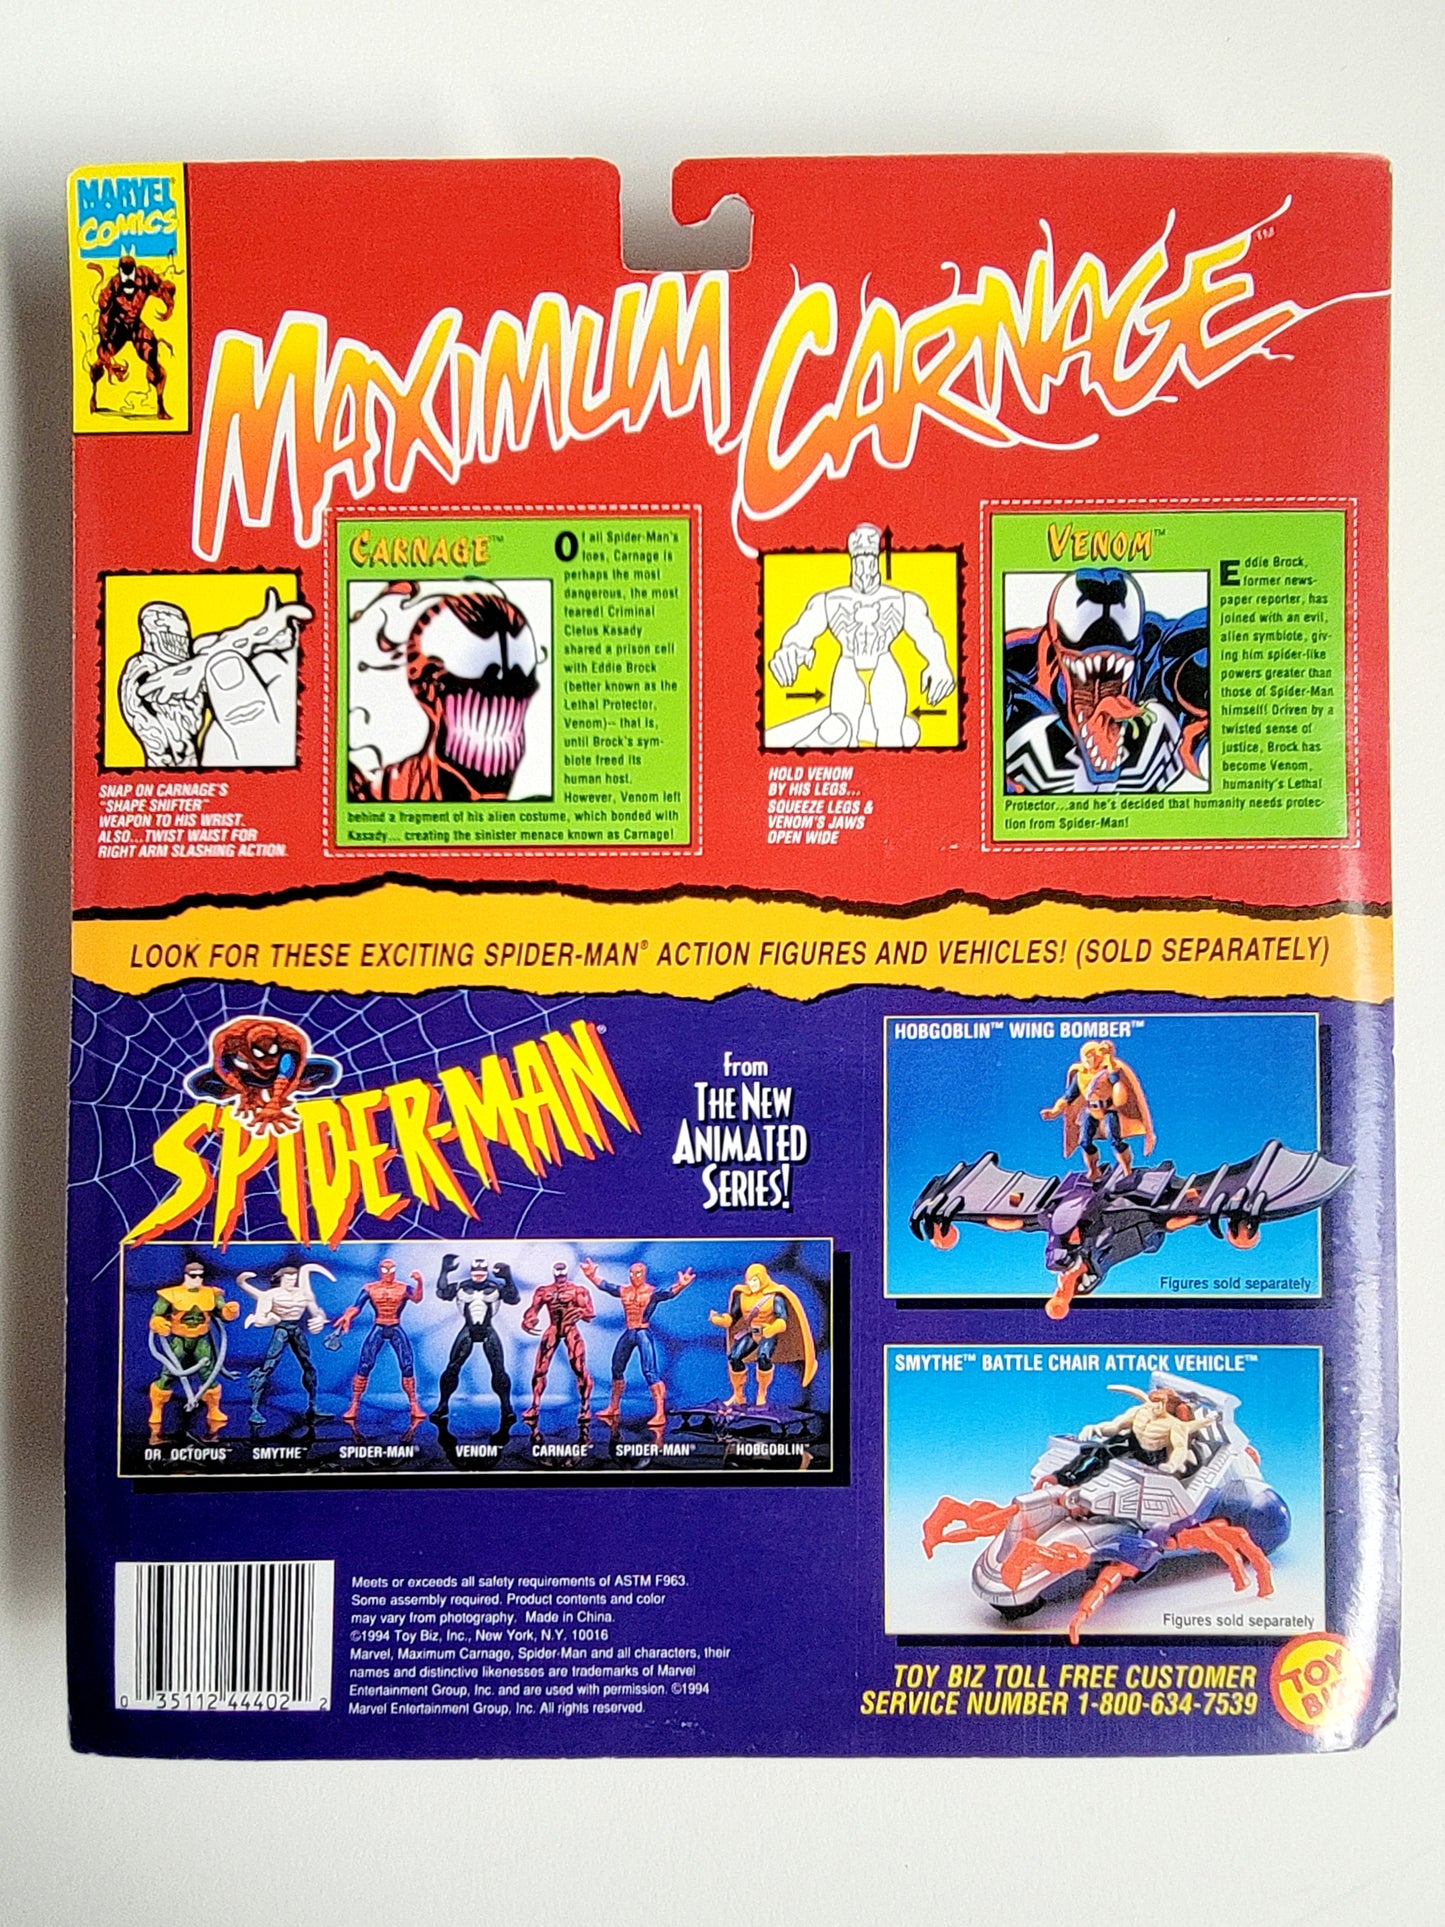 Maximum Carnage Battle Pack! with Carnage and Venom Action Figures